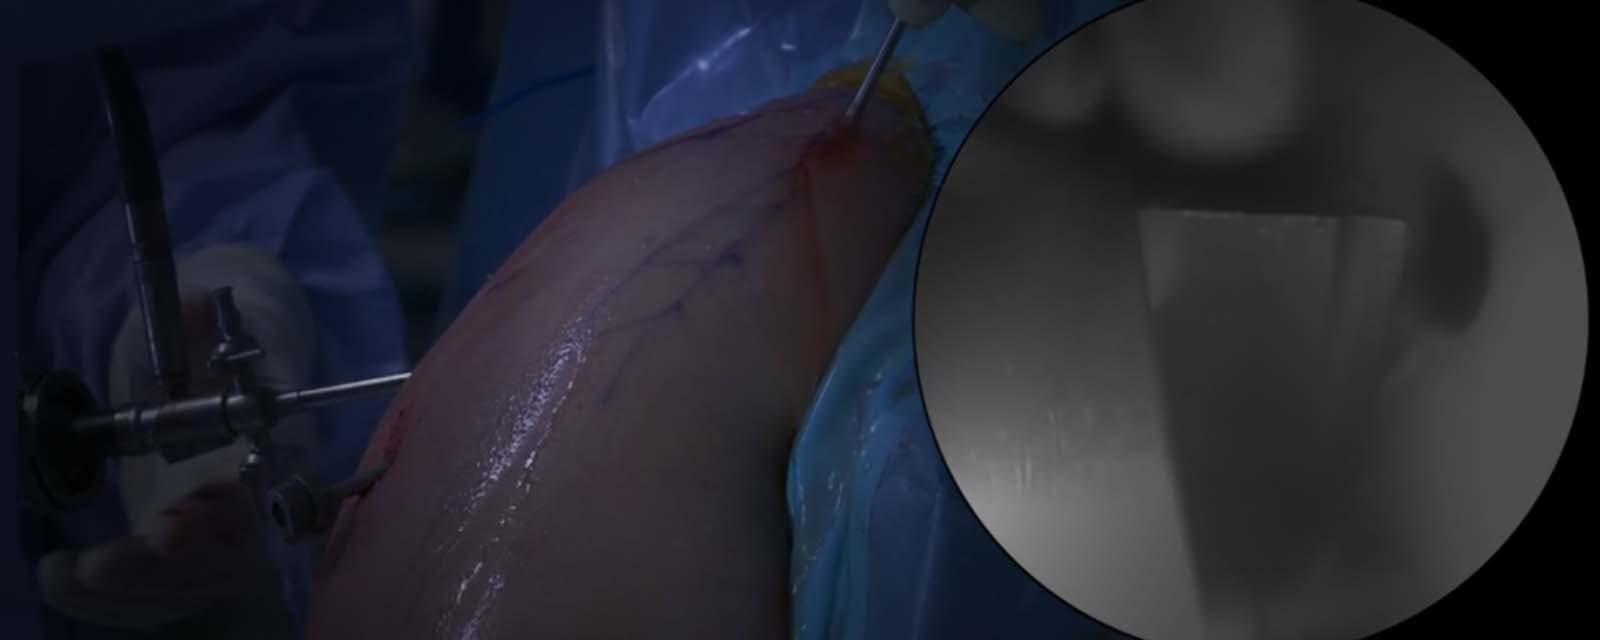 arthroscopic-total-shoulder-resurfacing-with-osteochondral-allograft